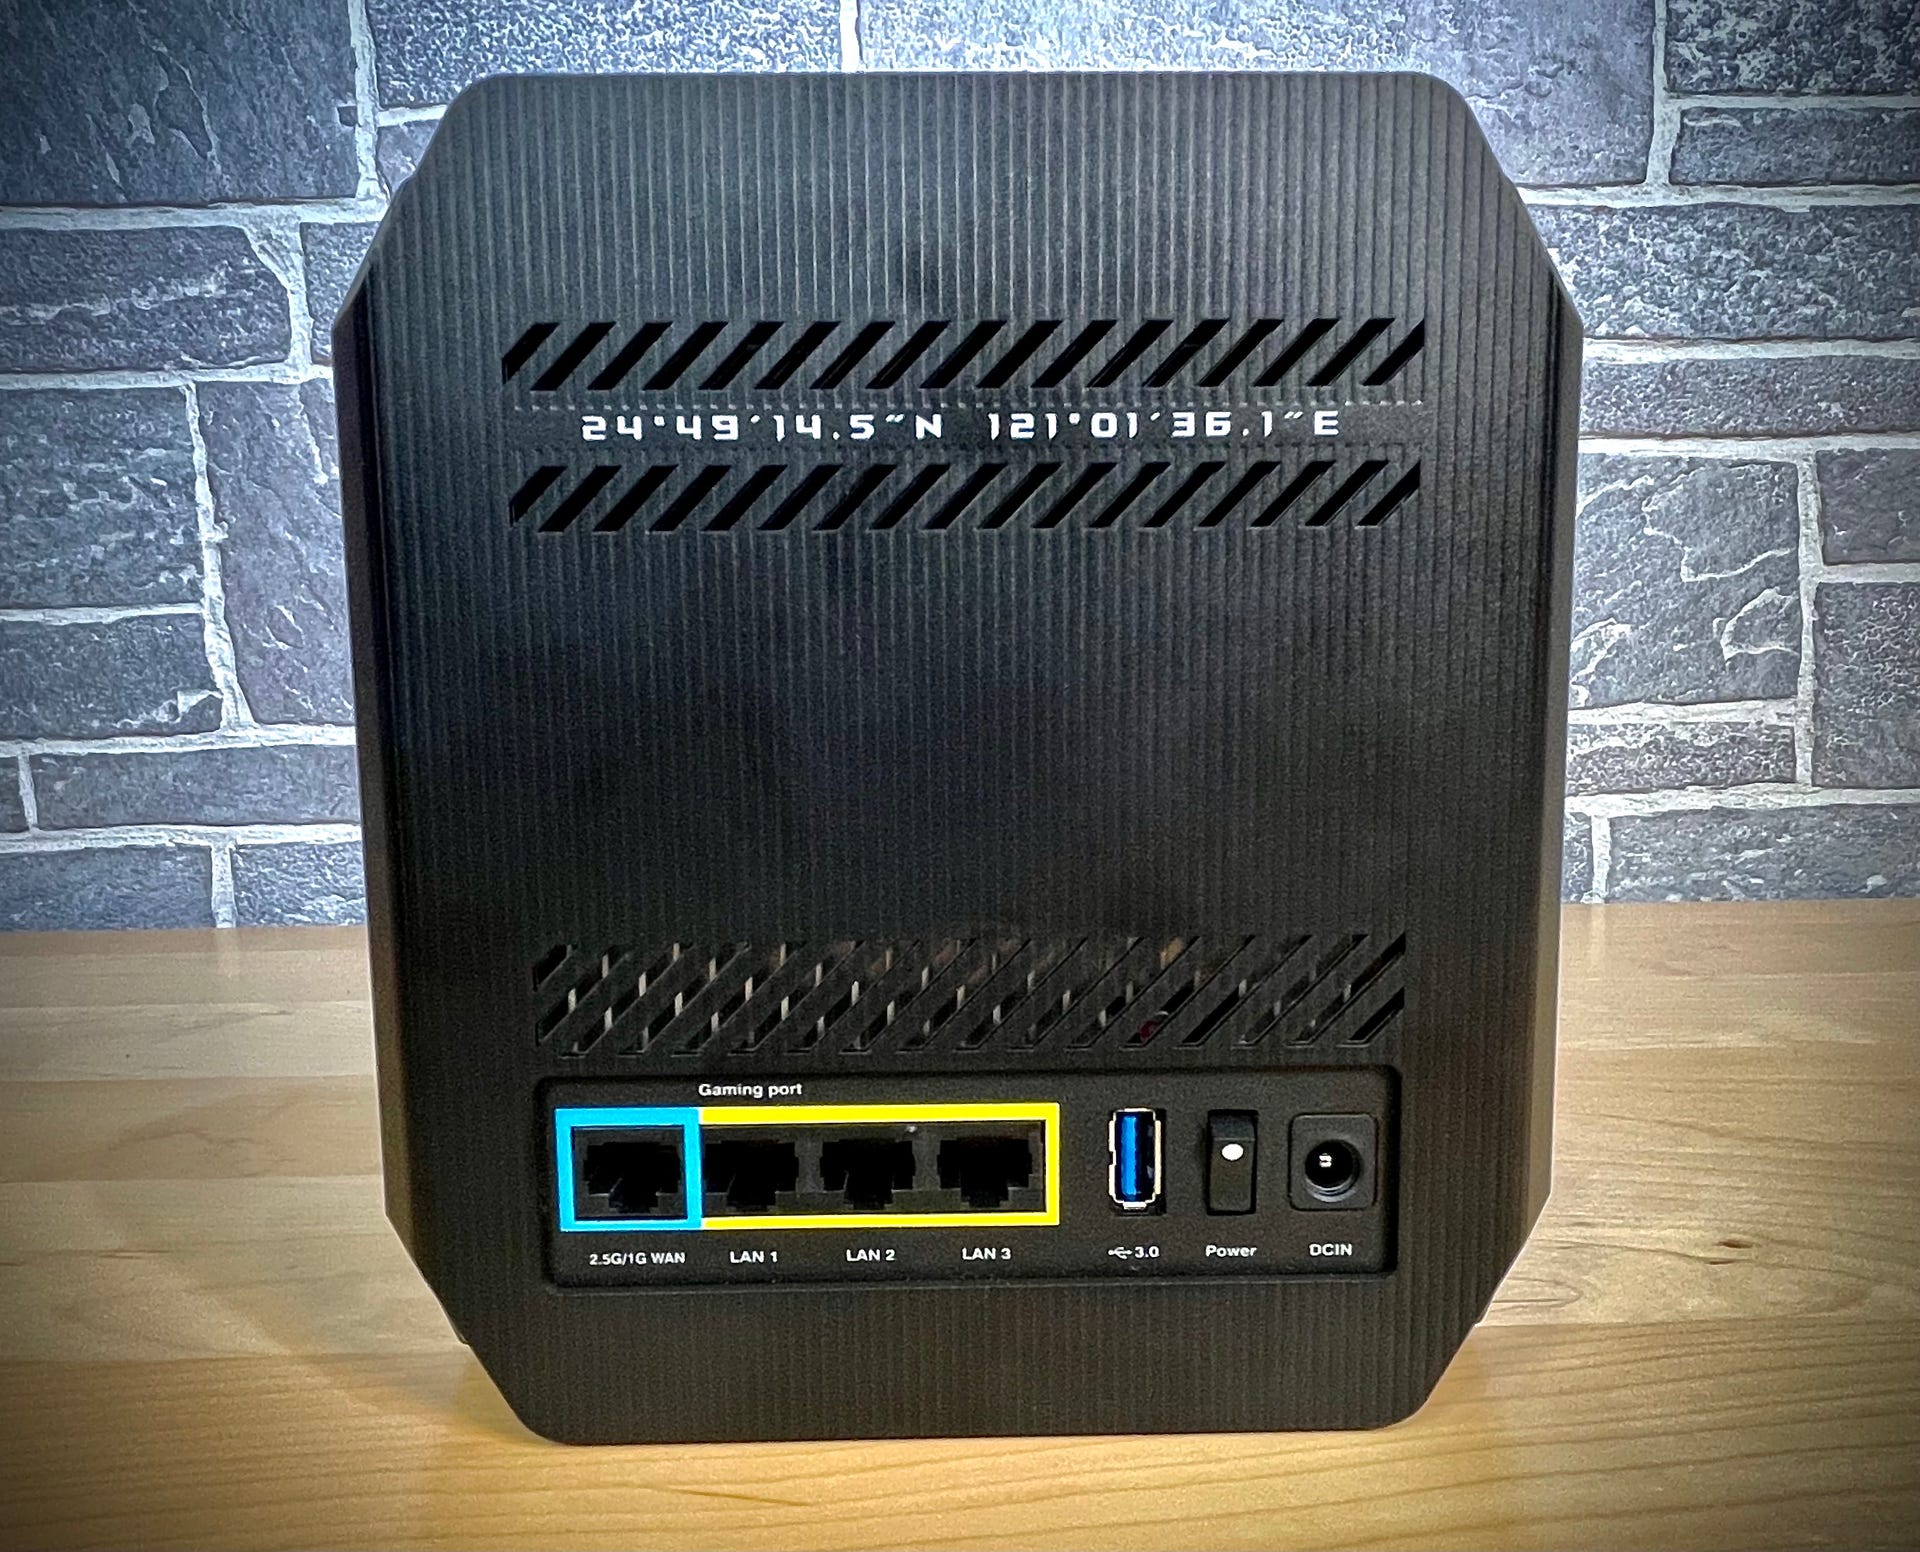 A close look at the back of an Asus Rog Rapture GT6 mesh gaming router reveals a physical power switch, a 2.5Gbps WAN port, three spare gigabit Ethernet LAN ports, a USB 3.2 port, and the A/C power port.